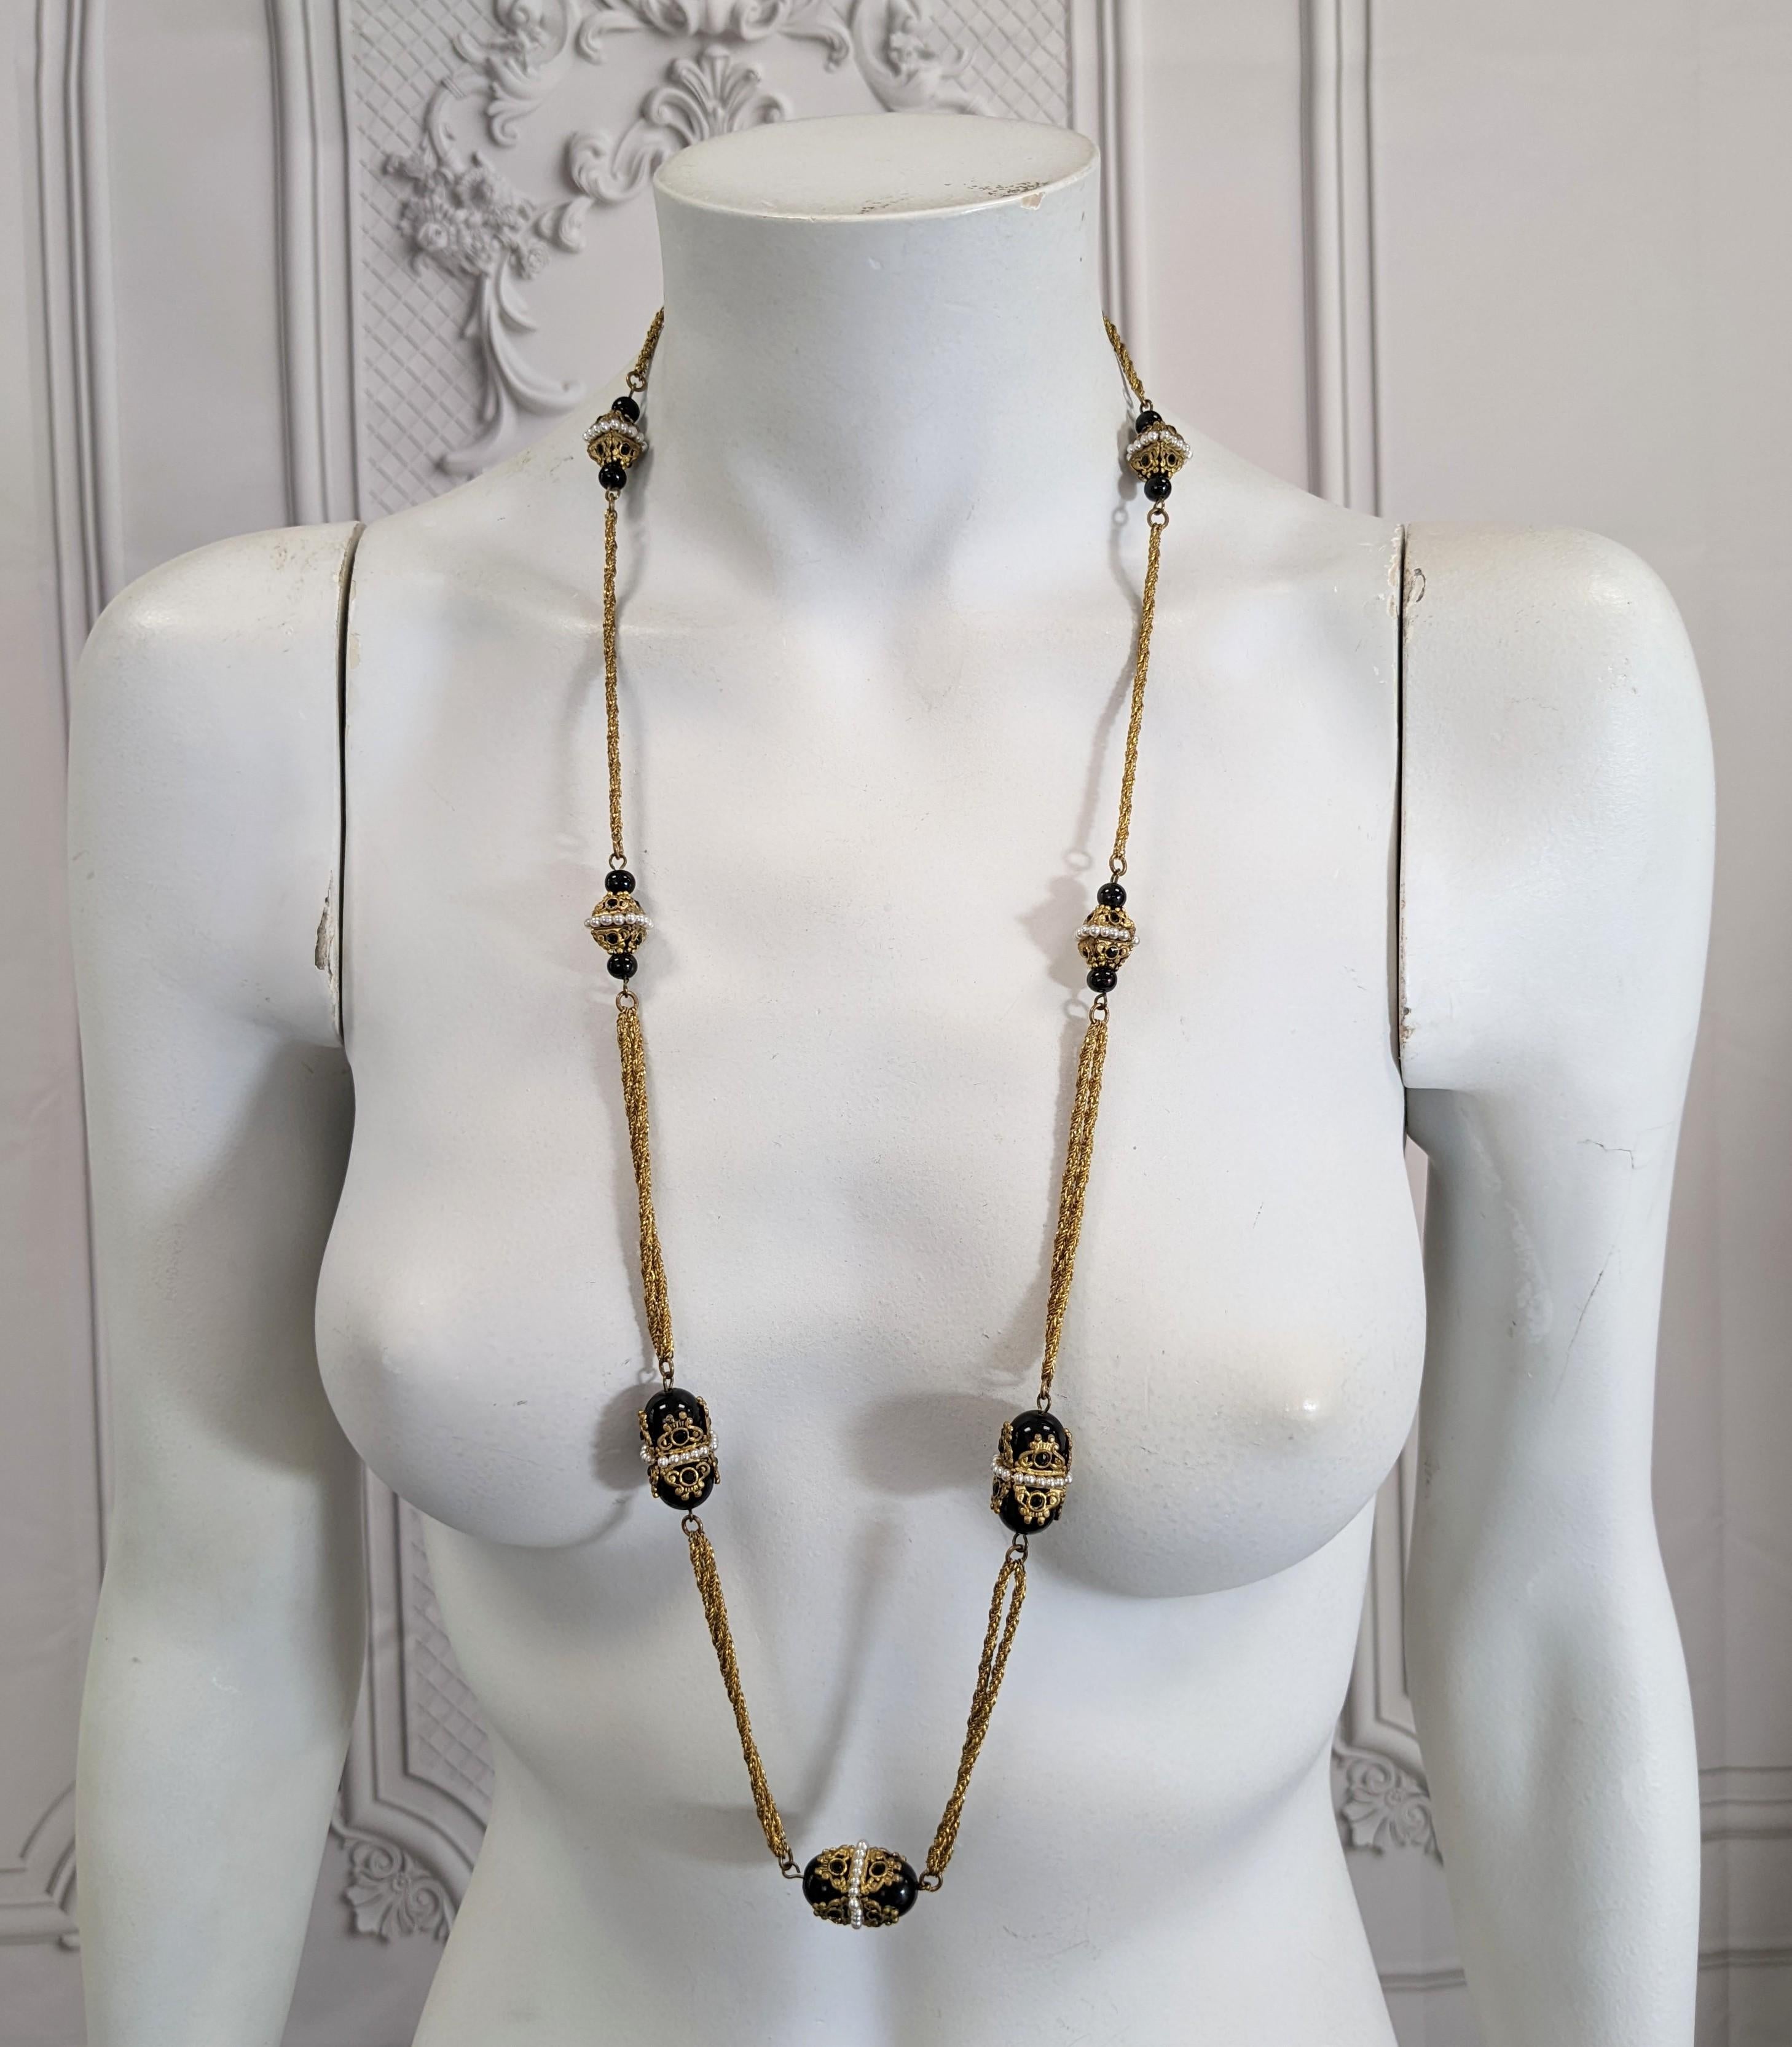 Goossens for Chanel Byzantine Jet and Faux Pearl Sautoir Necklace For Sale 1